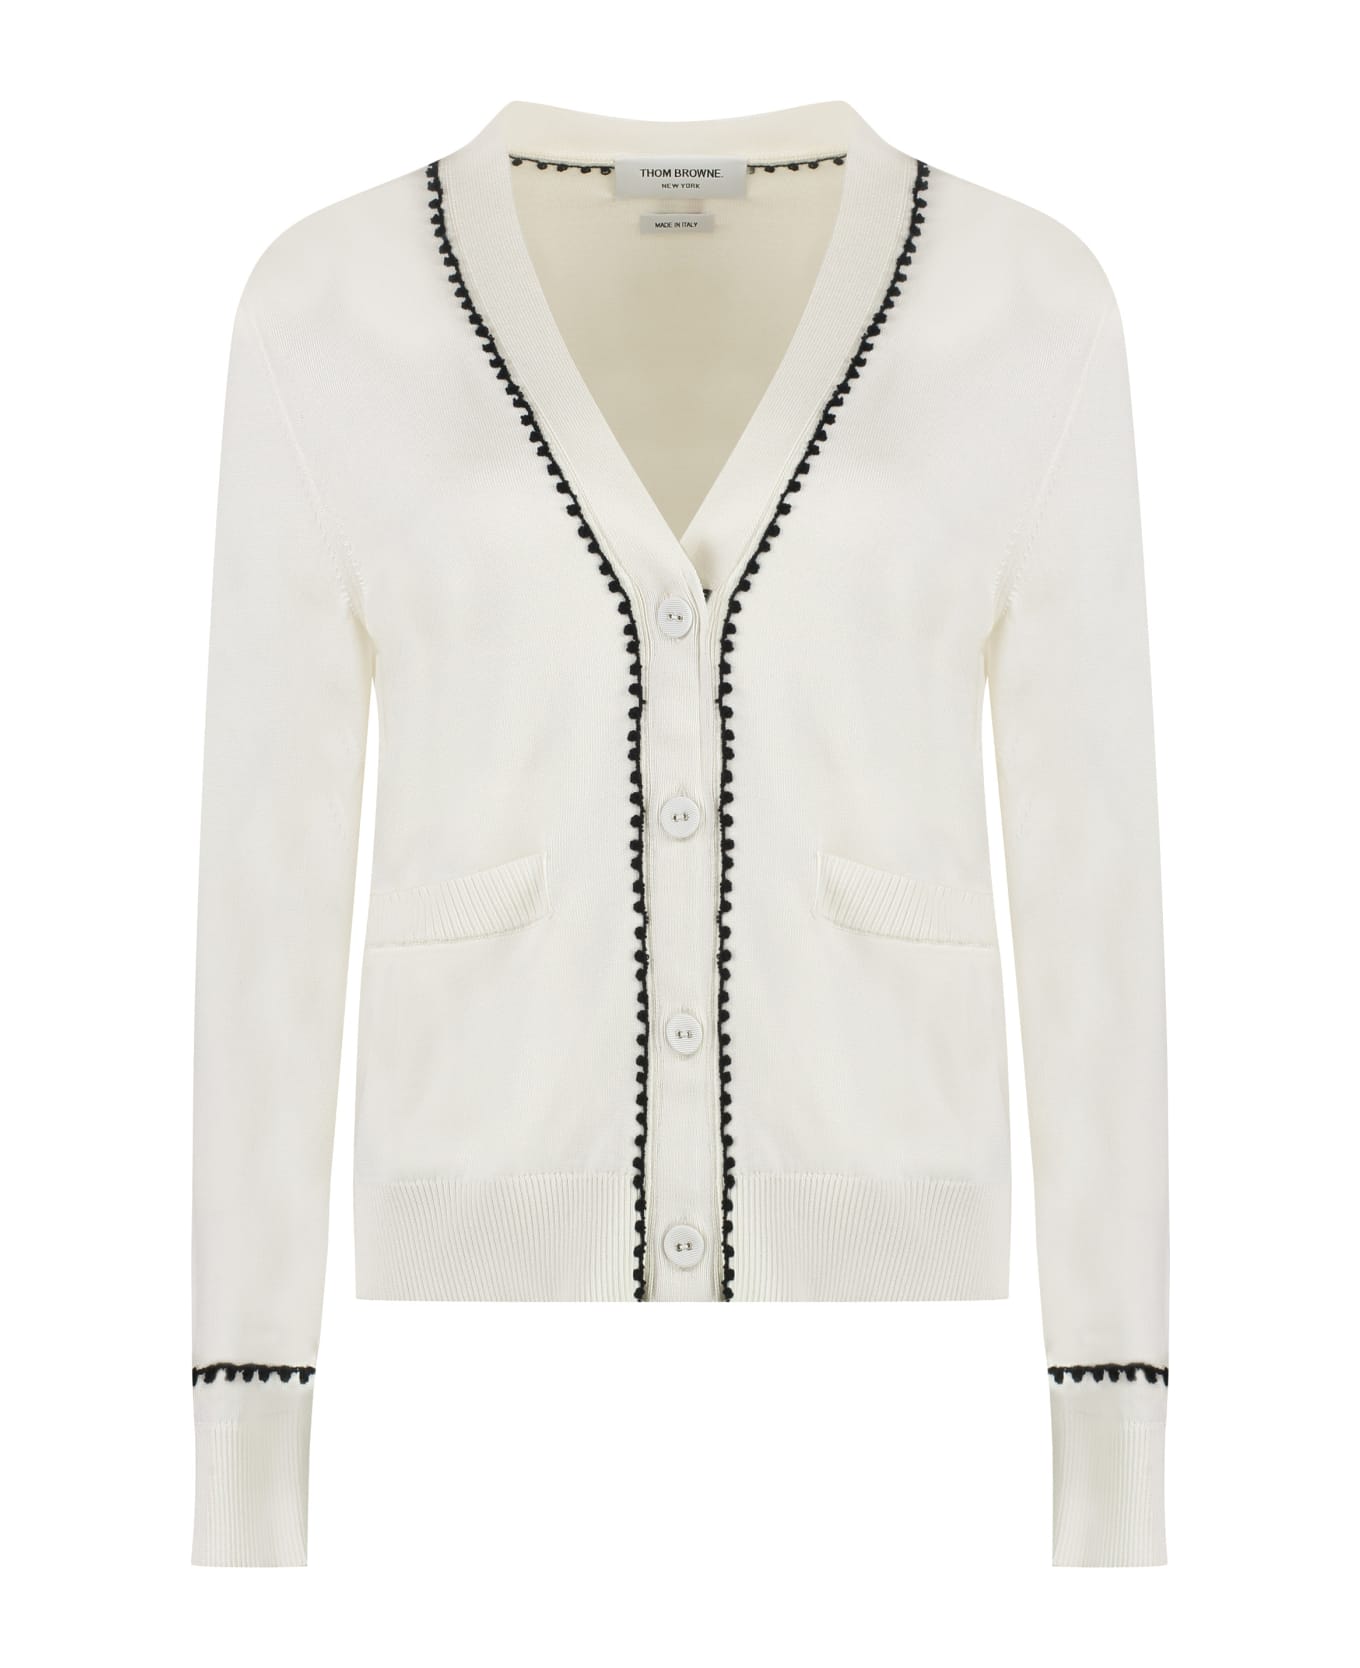 Thom Browne Cardigan In Silk And Cotton - White カーディガン